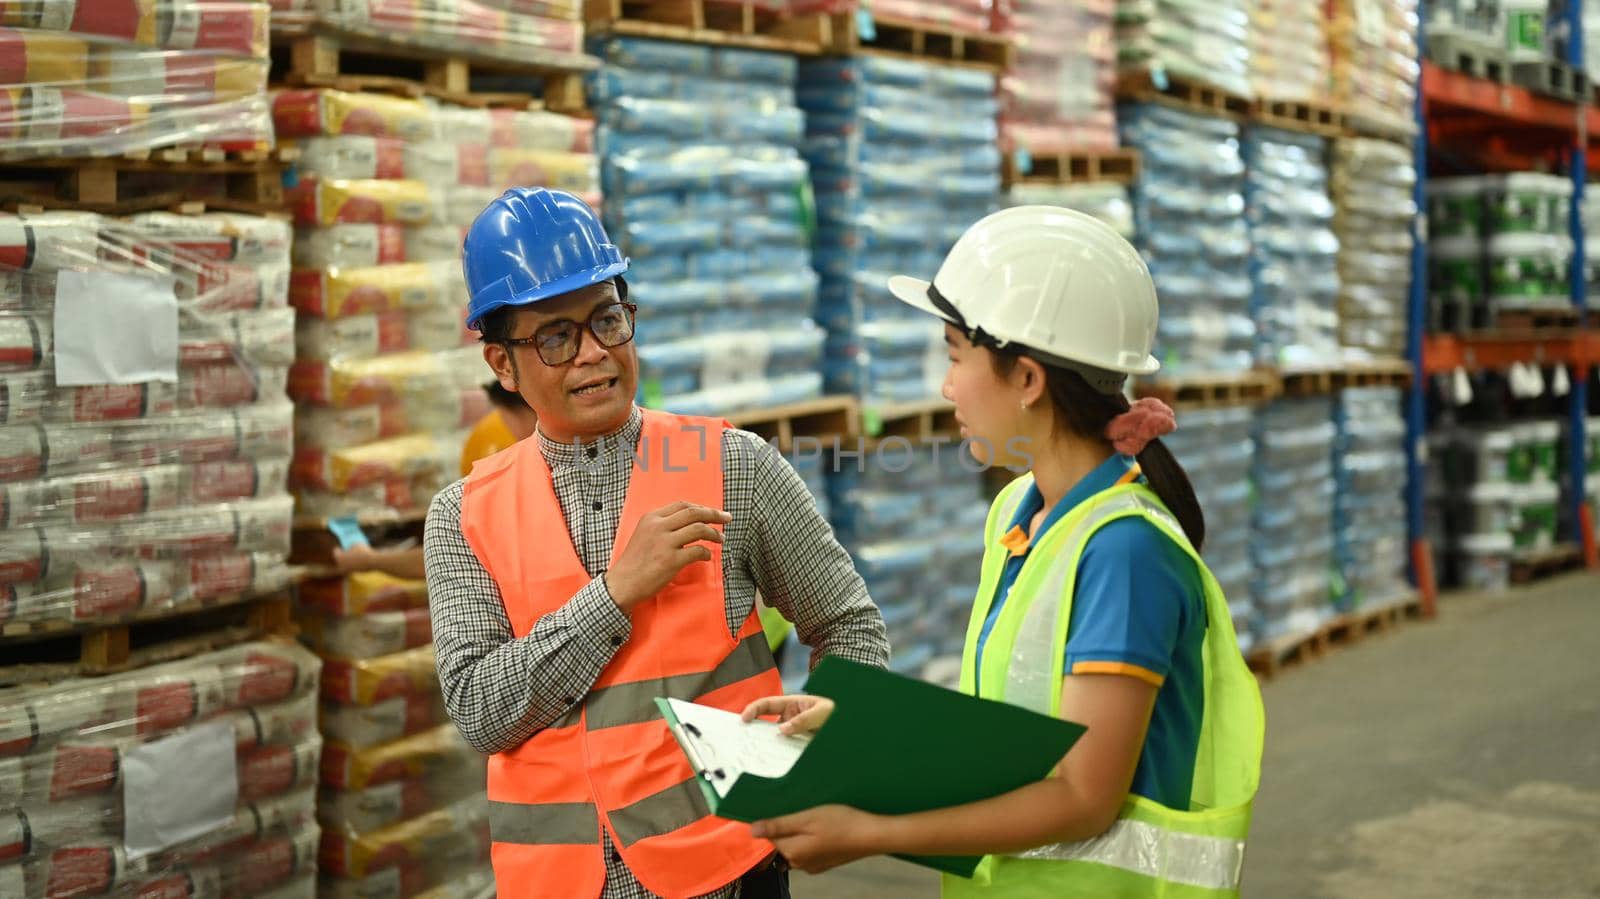 Senior male manager and woman warehouse worker discussing work while walking in aisle between rows of tall shelves full of packed boxes by prathanchorruangsak